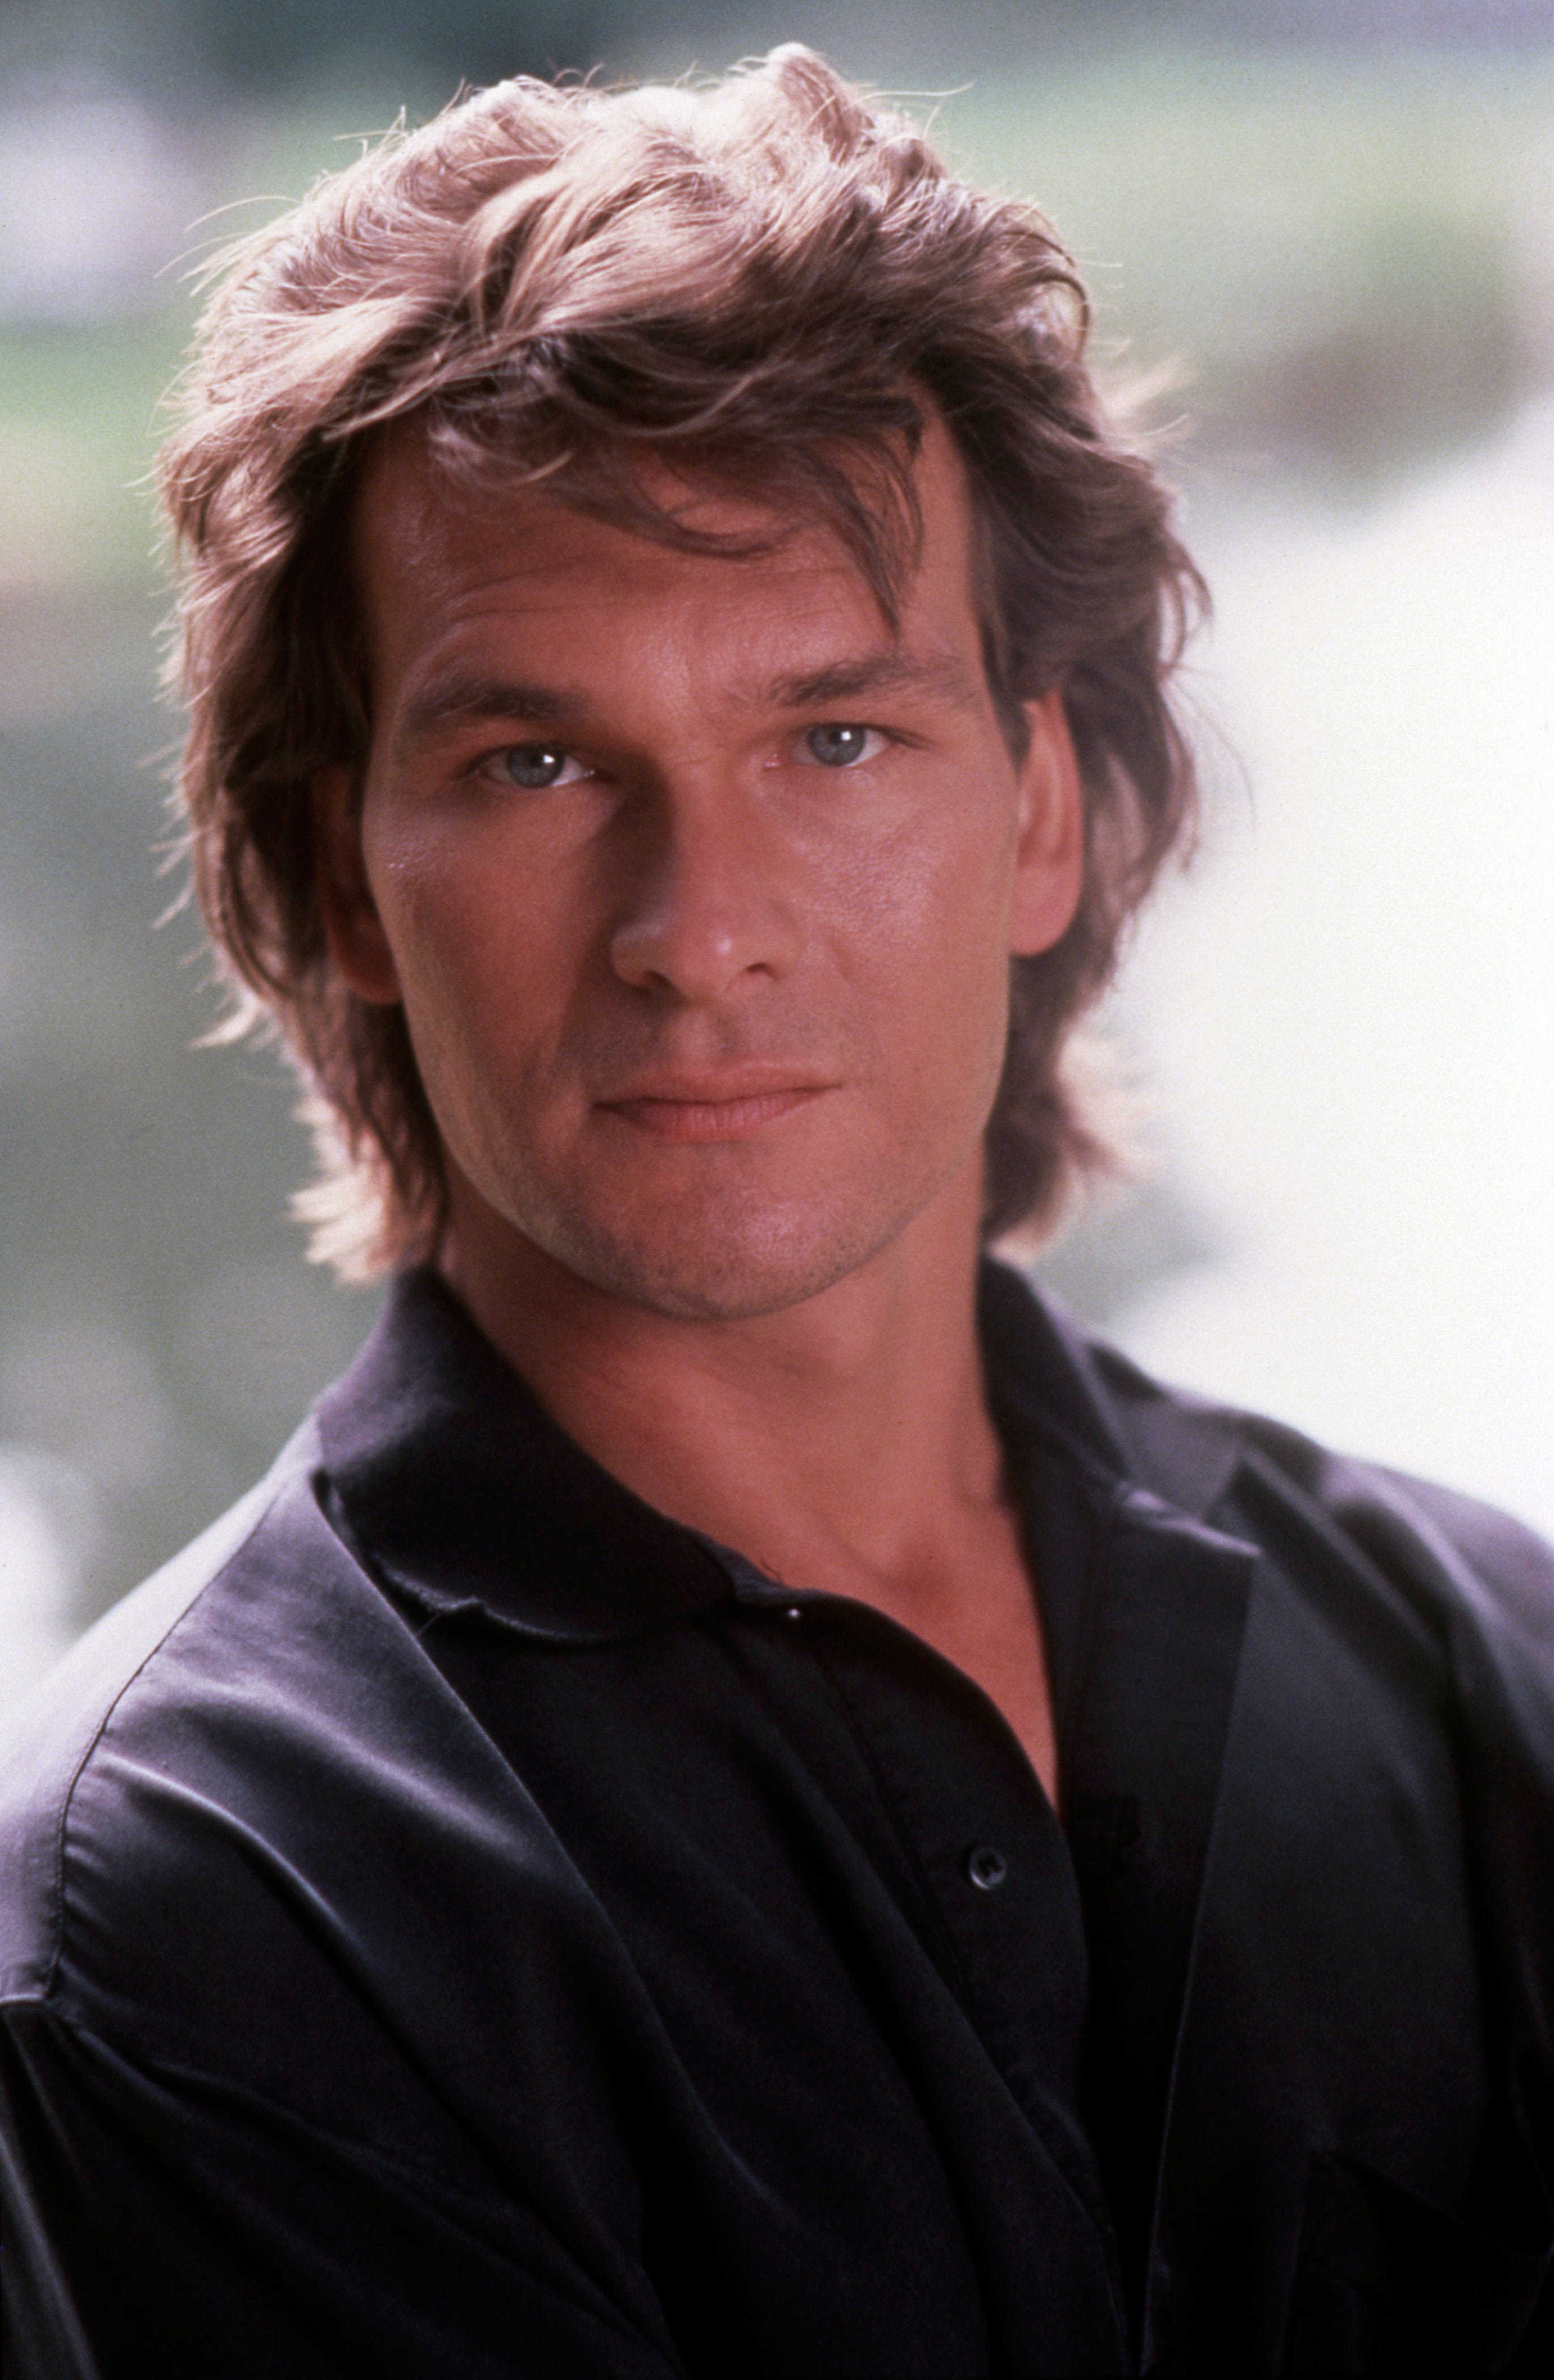 Patrick Swayze Documentary 5 Emotional Moments That Will Wreck You